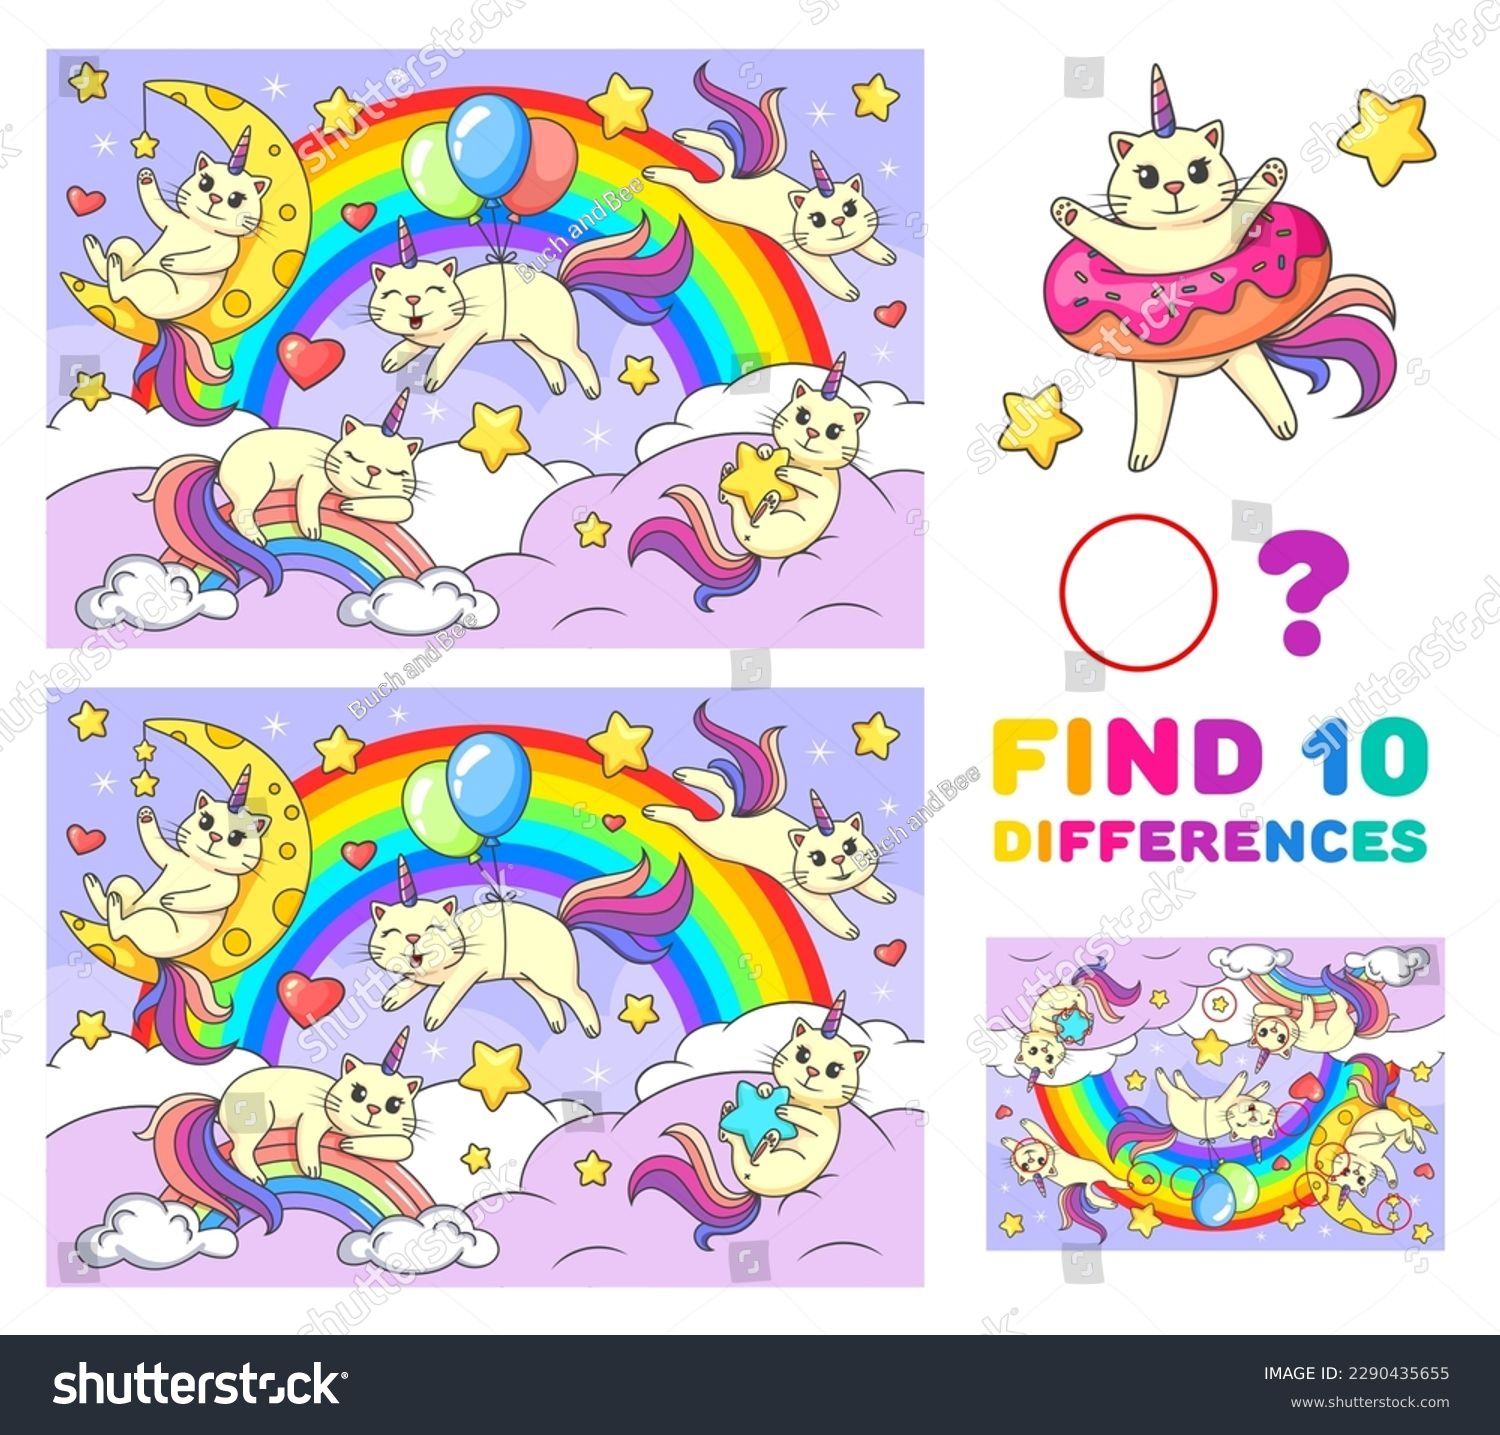 SVG of Find ten differences game. Cartoon funny caticorn cats on rainbow. Kids vector educational or recreational puzzle with cute kawaii unicorn kittens fantasy characters. Children riddle, leisure activity svg